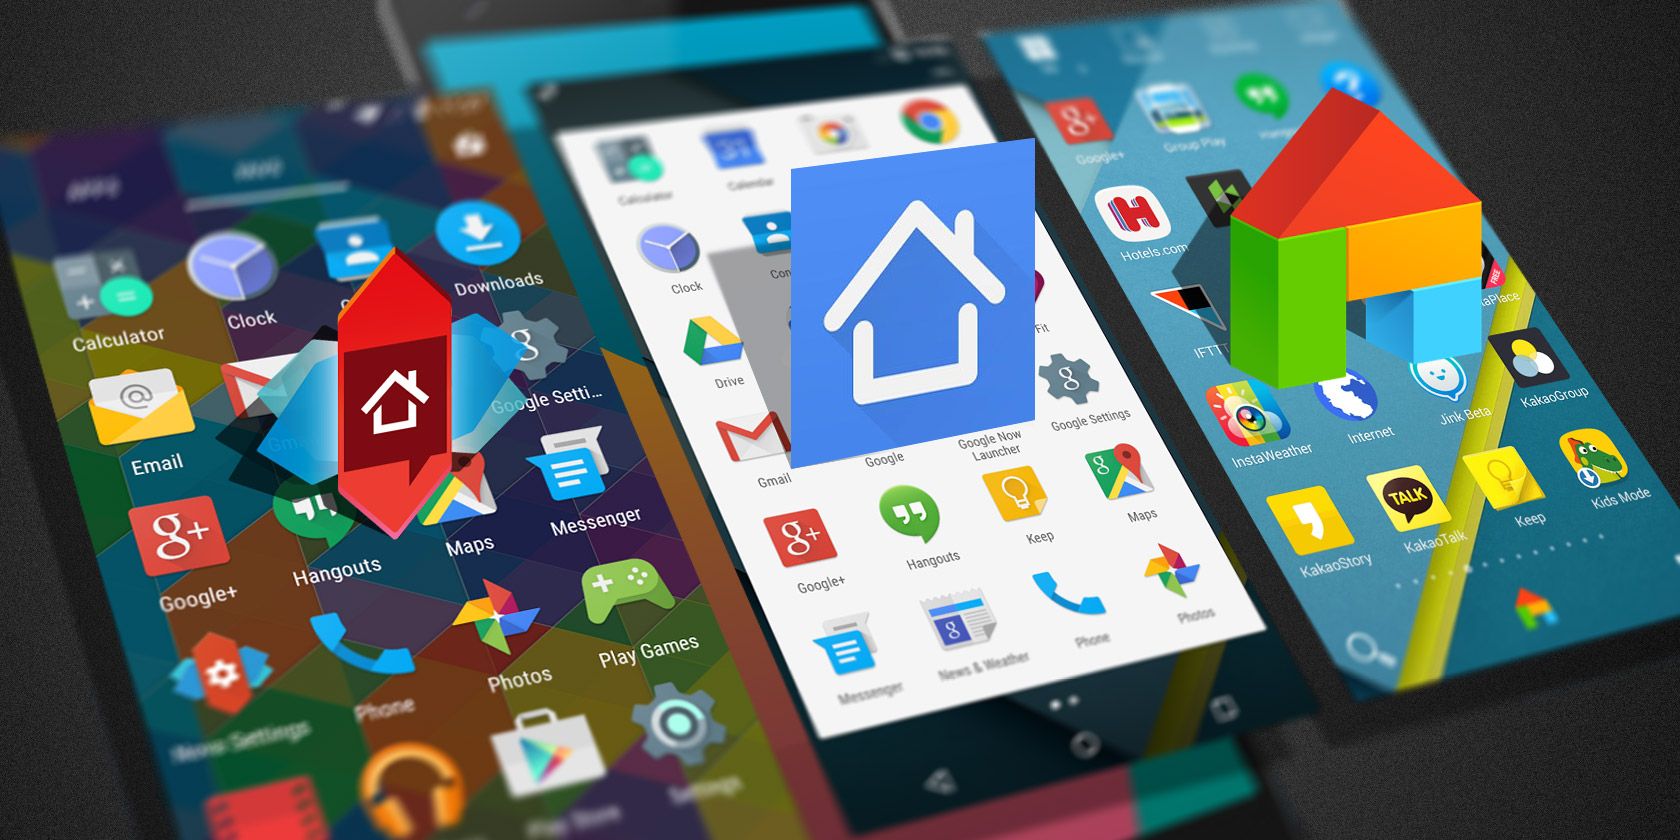 What Is the Best Free Android Launcher?